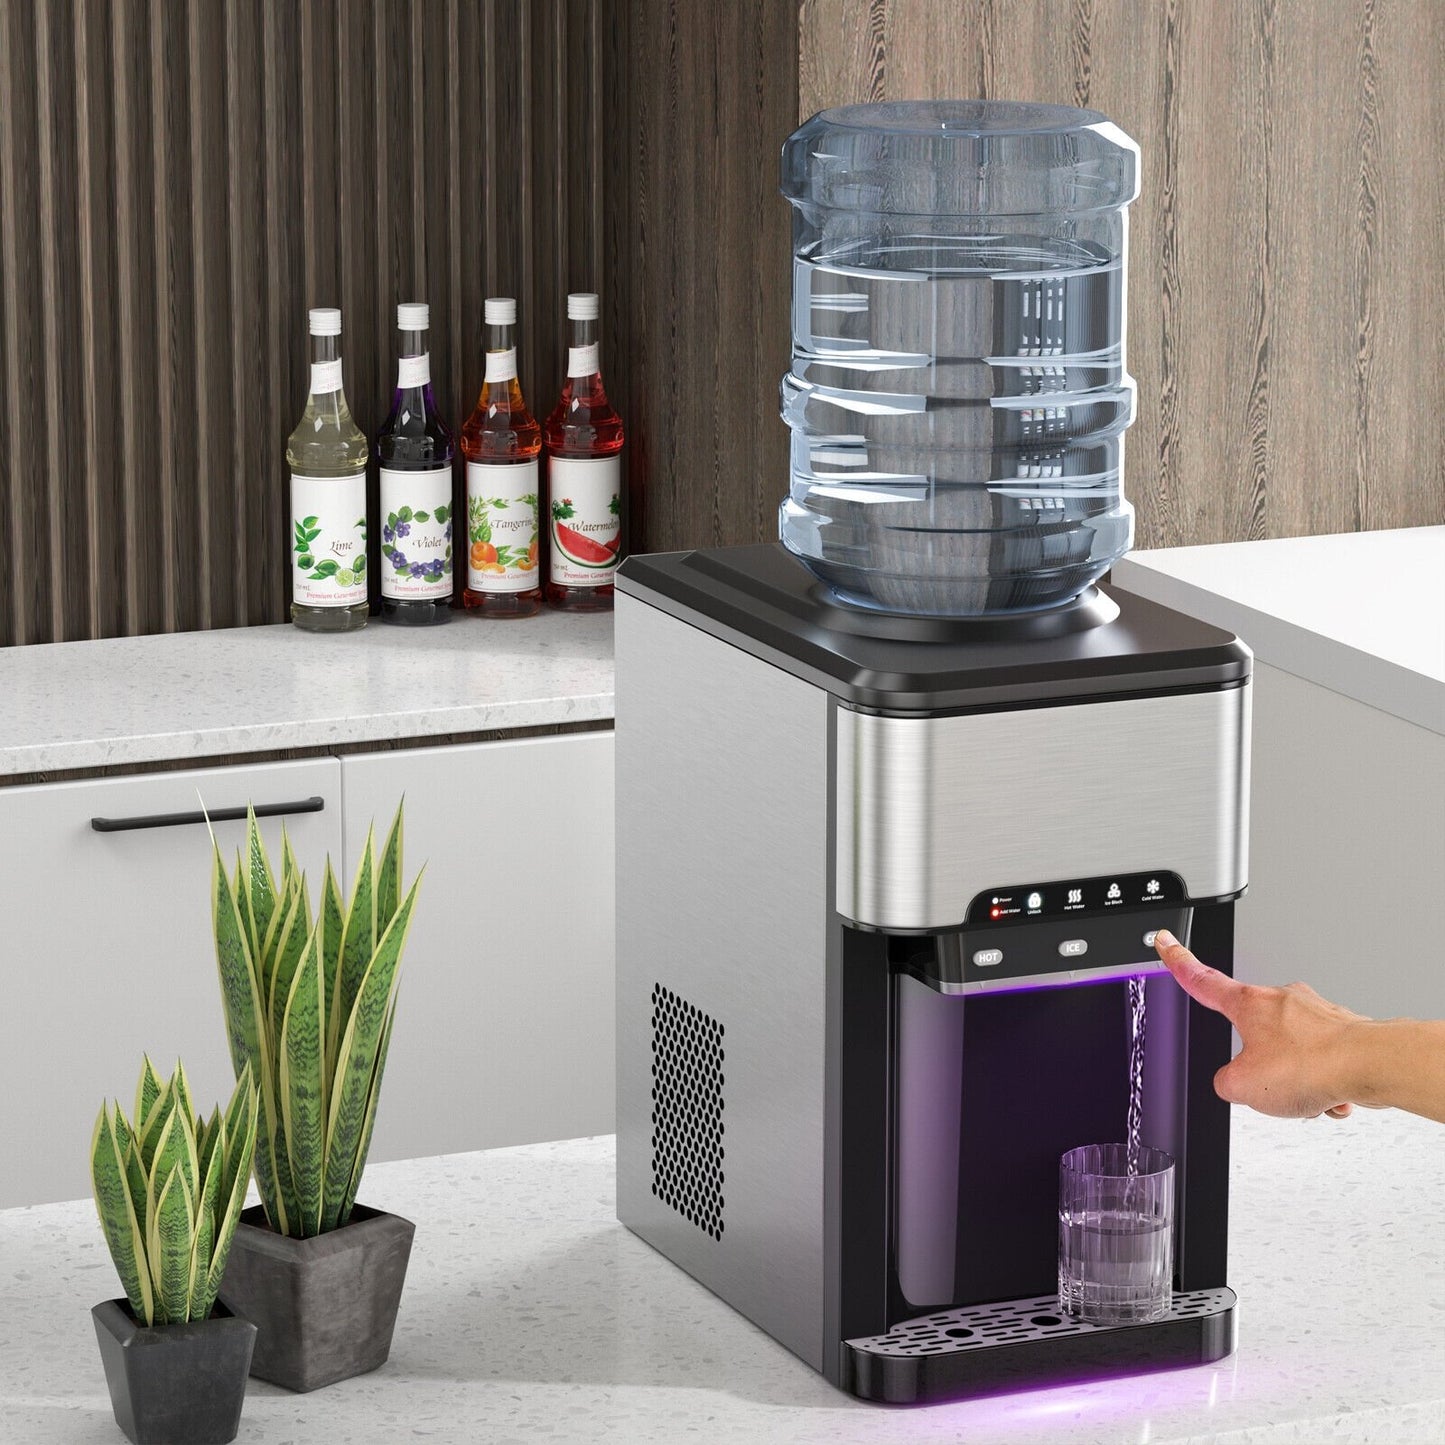 3-in-1 Water Cooler Dispenser with Built-in Ice Maker and 3 Temperature Settings, Silver